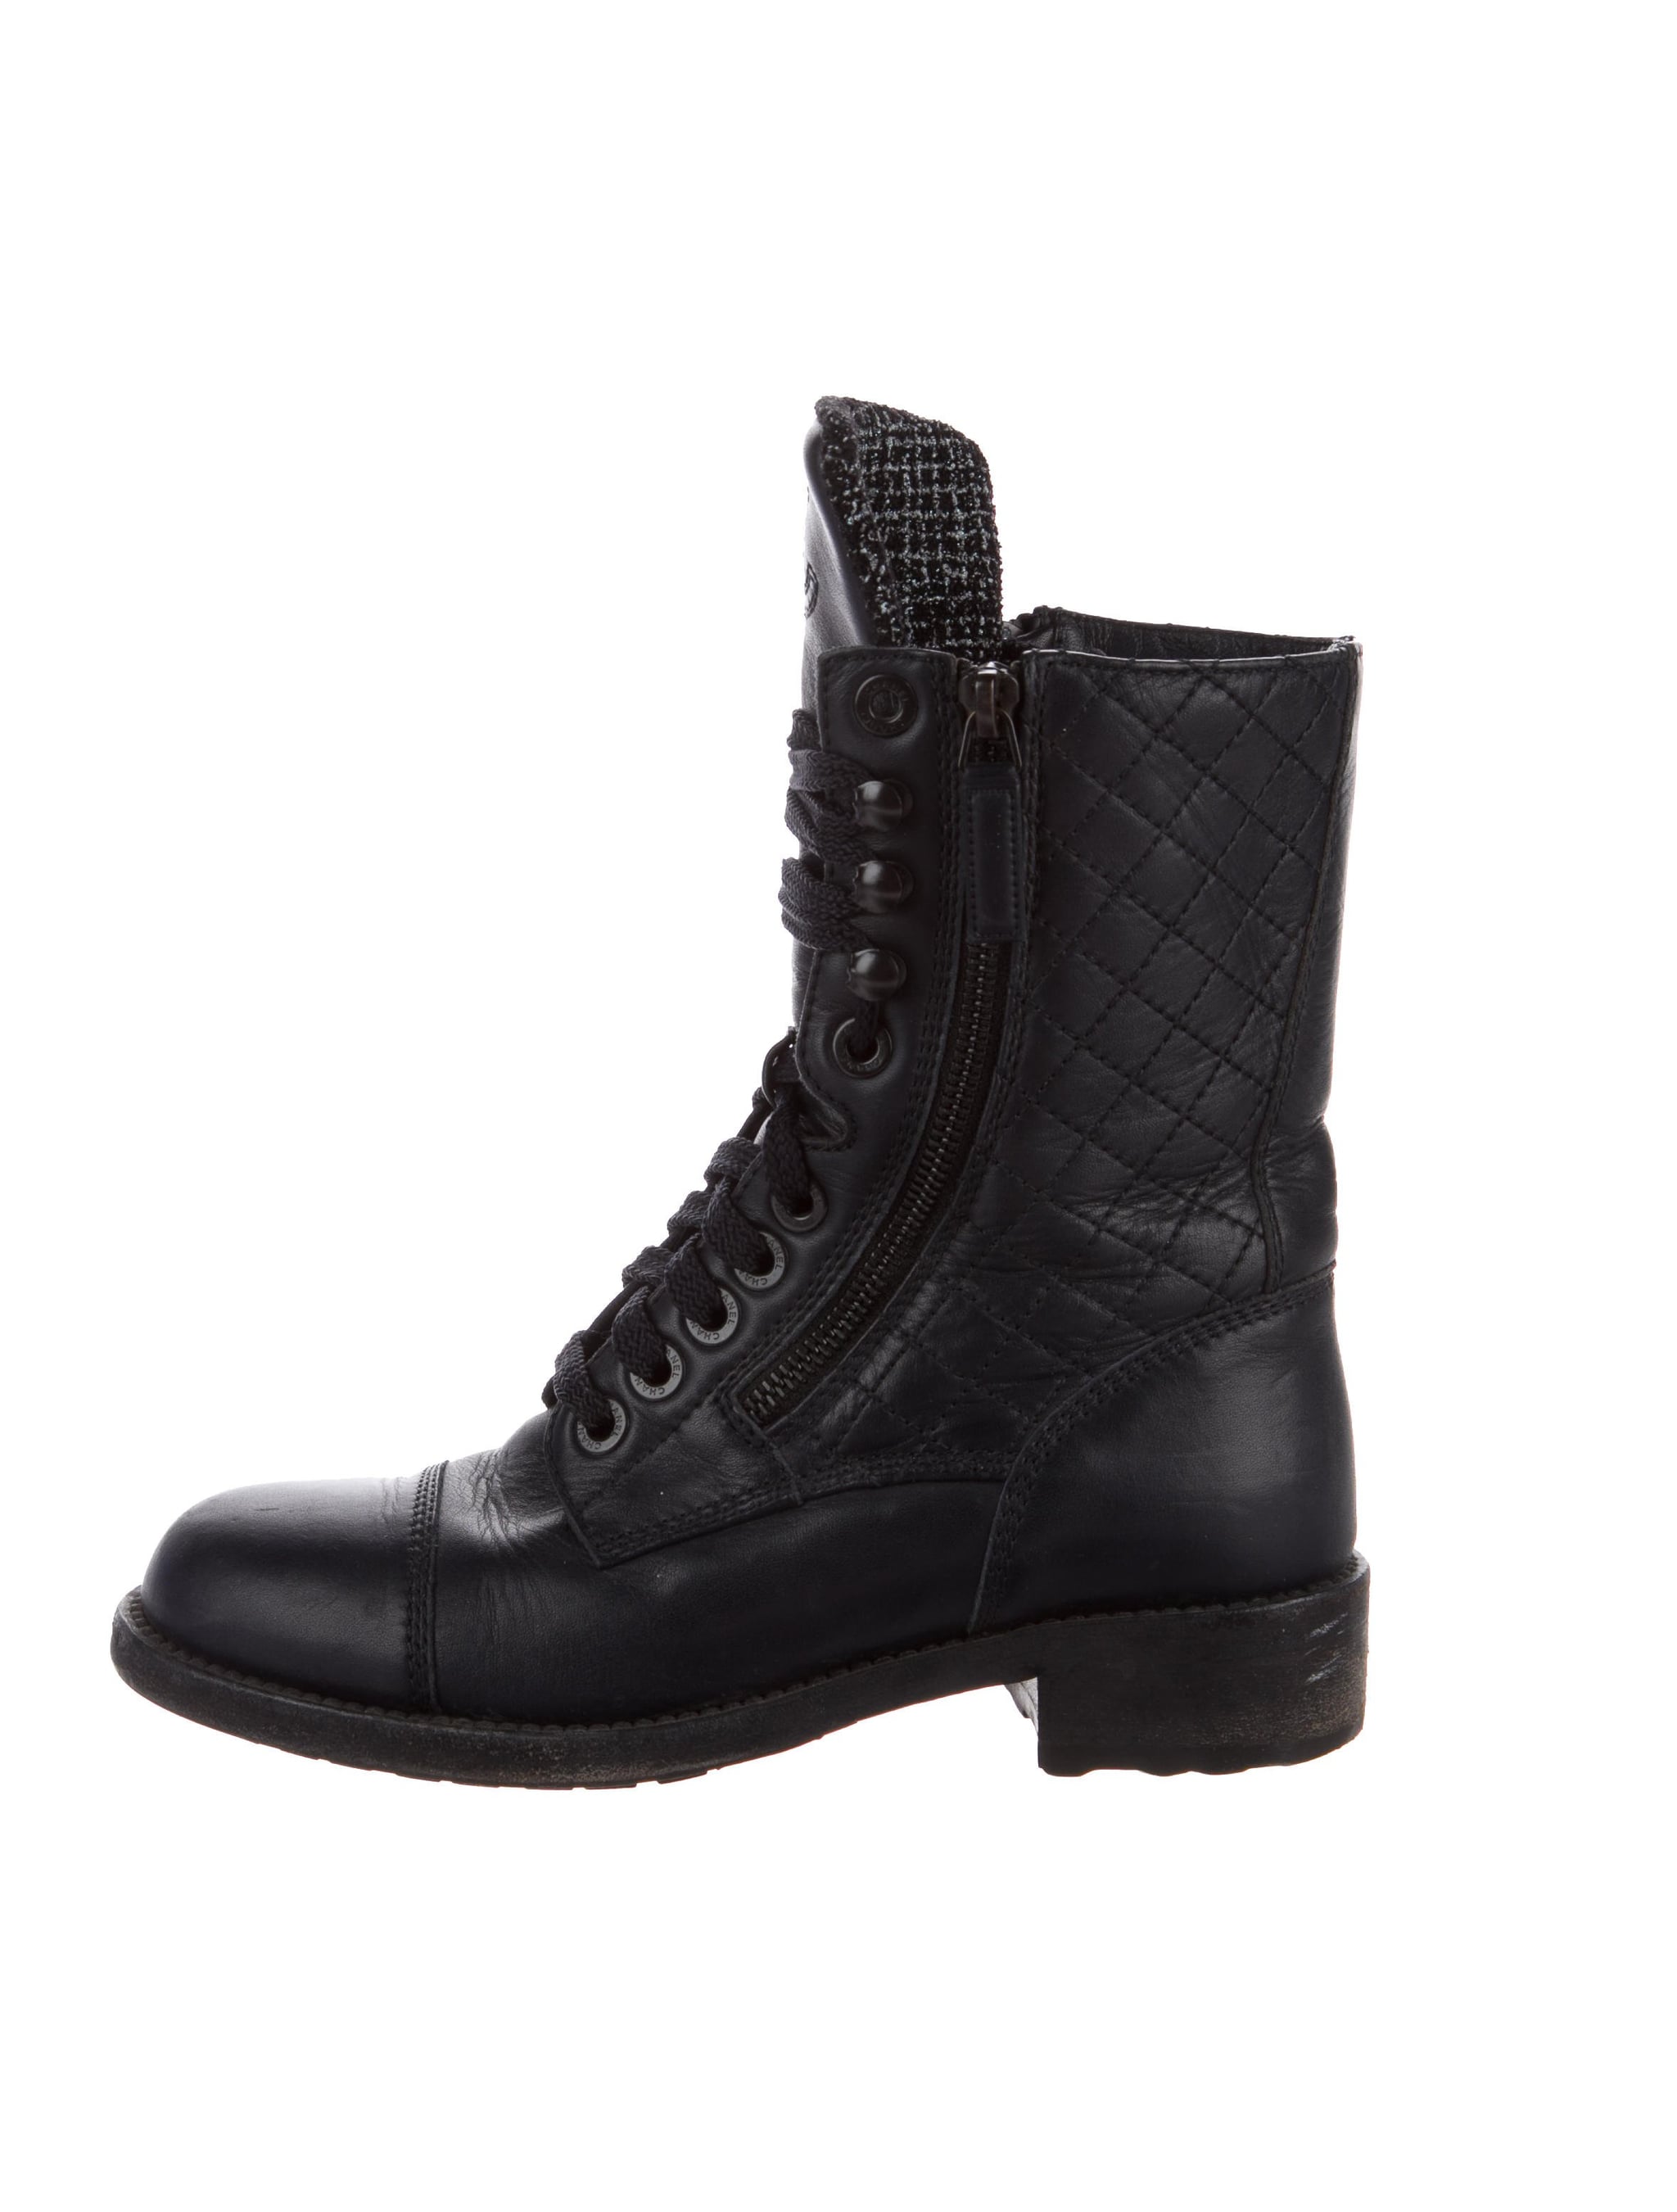 Chanel Leather Combat Boots | See Shop Every Look Editors to New York Fashion Week | POPSUGAR Fashion Photo 35